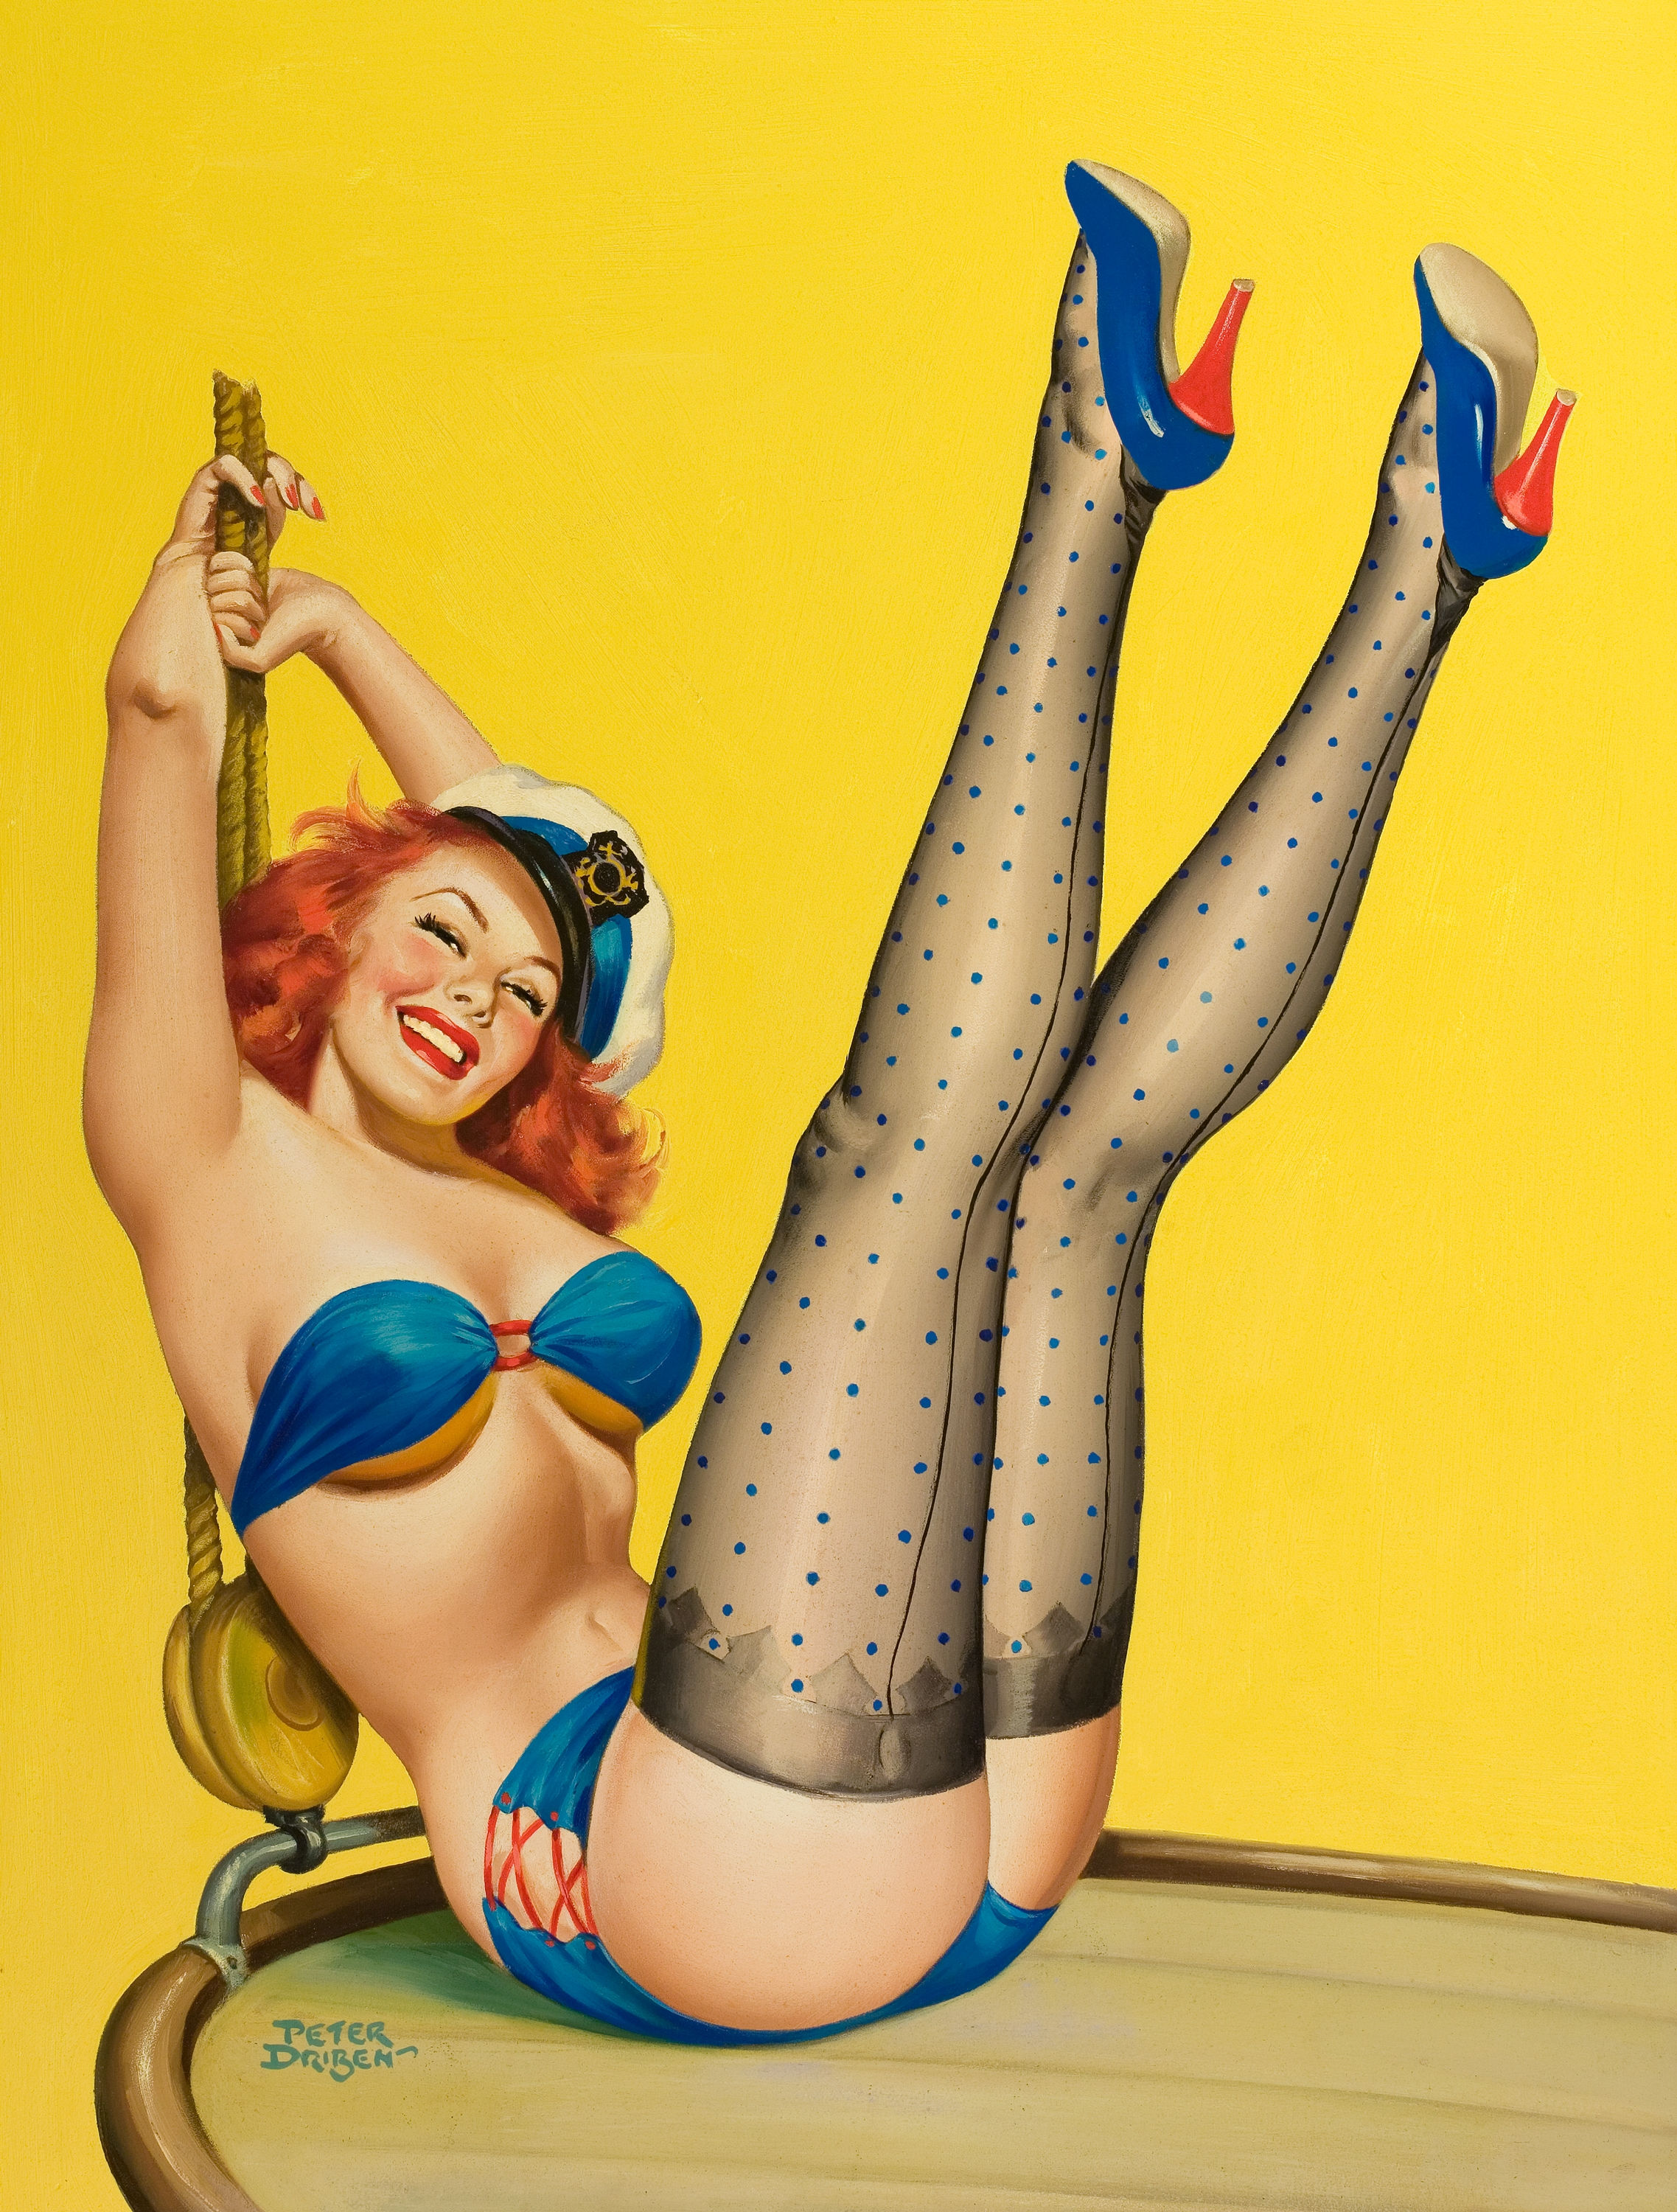 How To: Modern Pin-Up Styles You Need To Know